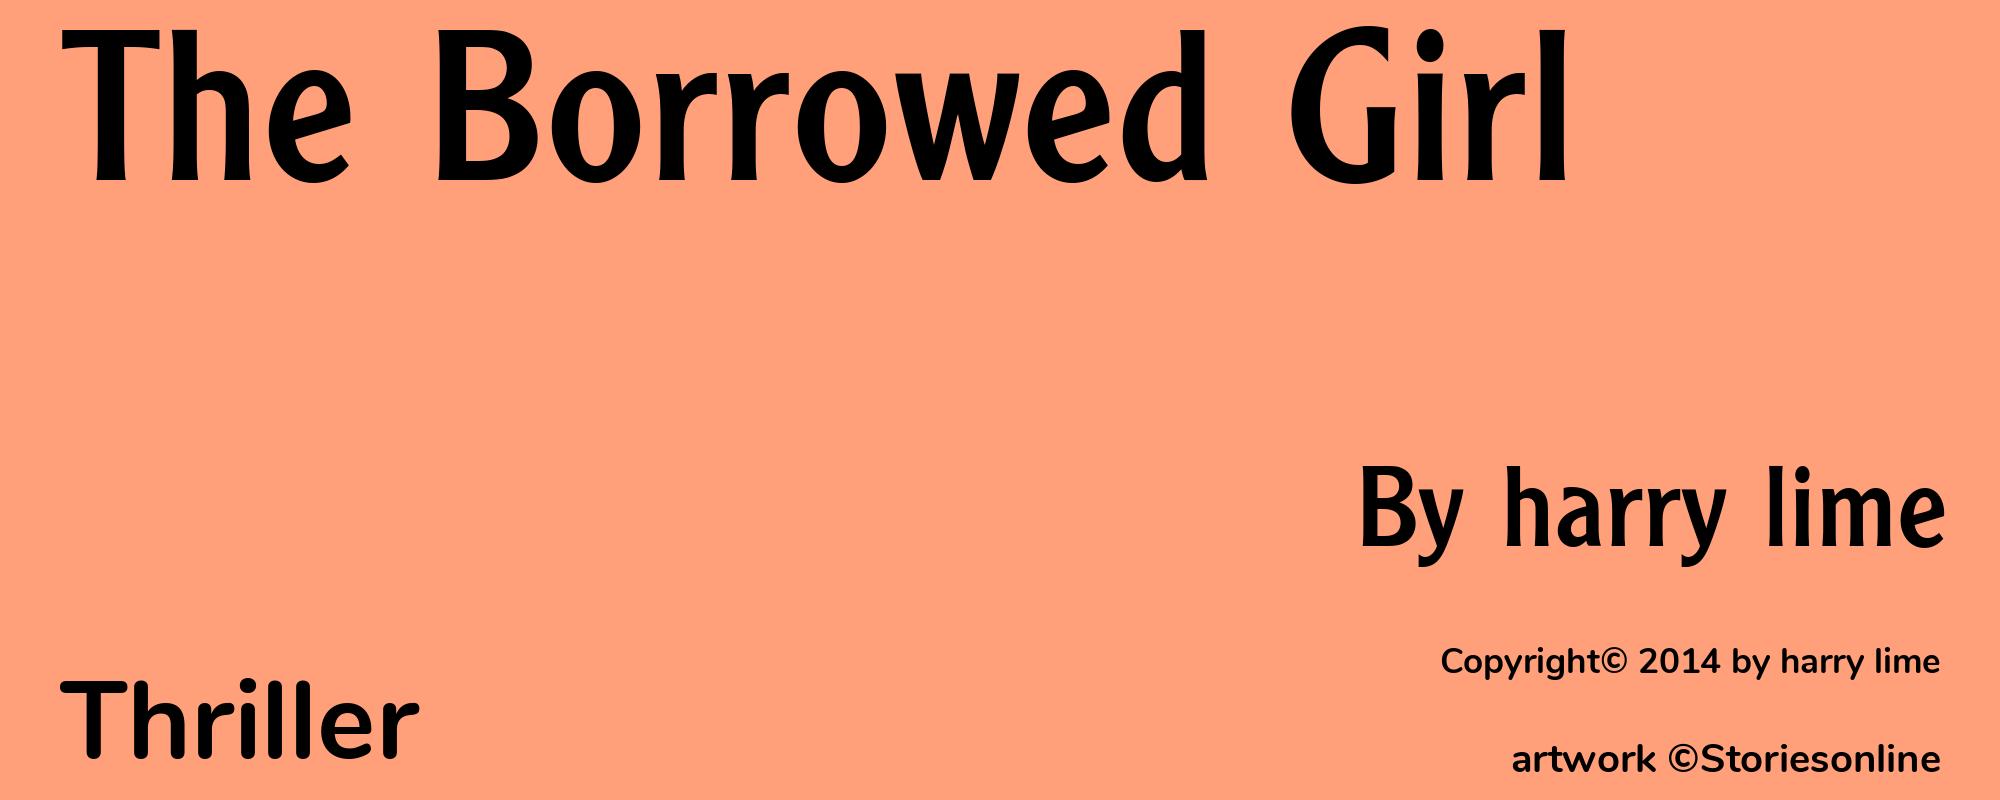 The Borrowed Girl - Cover